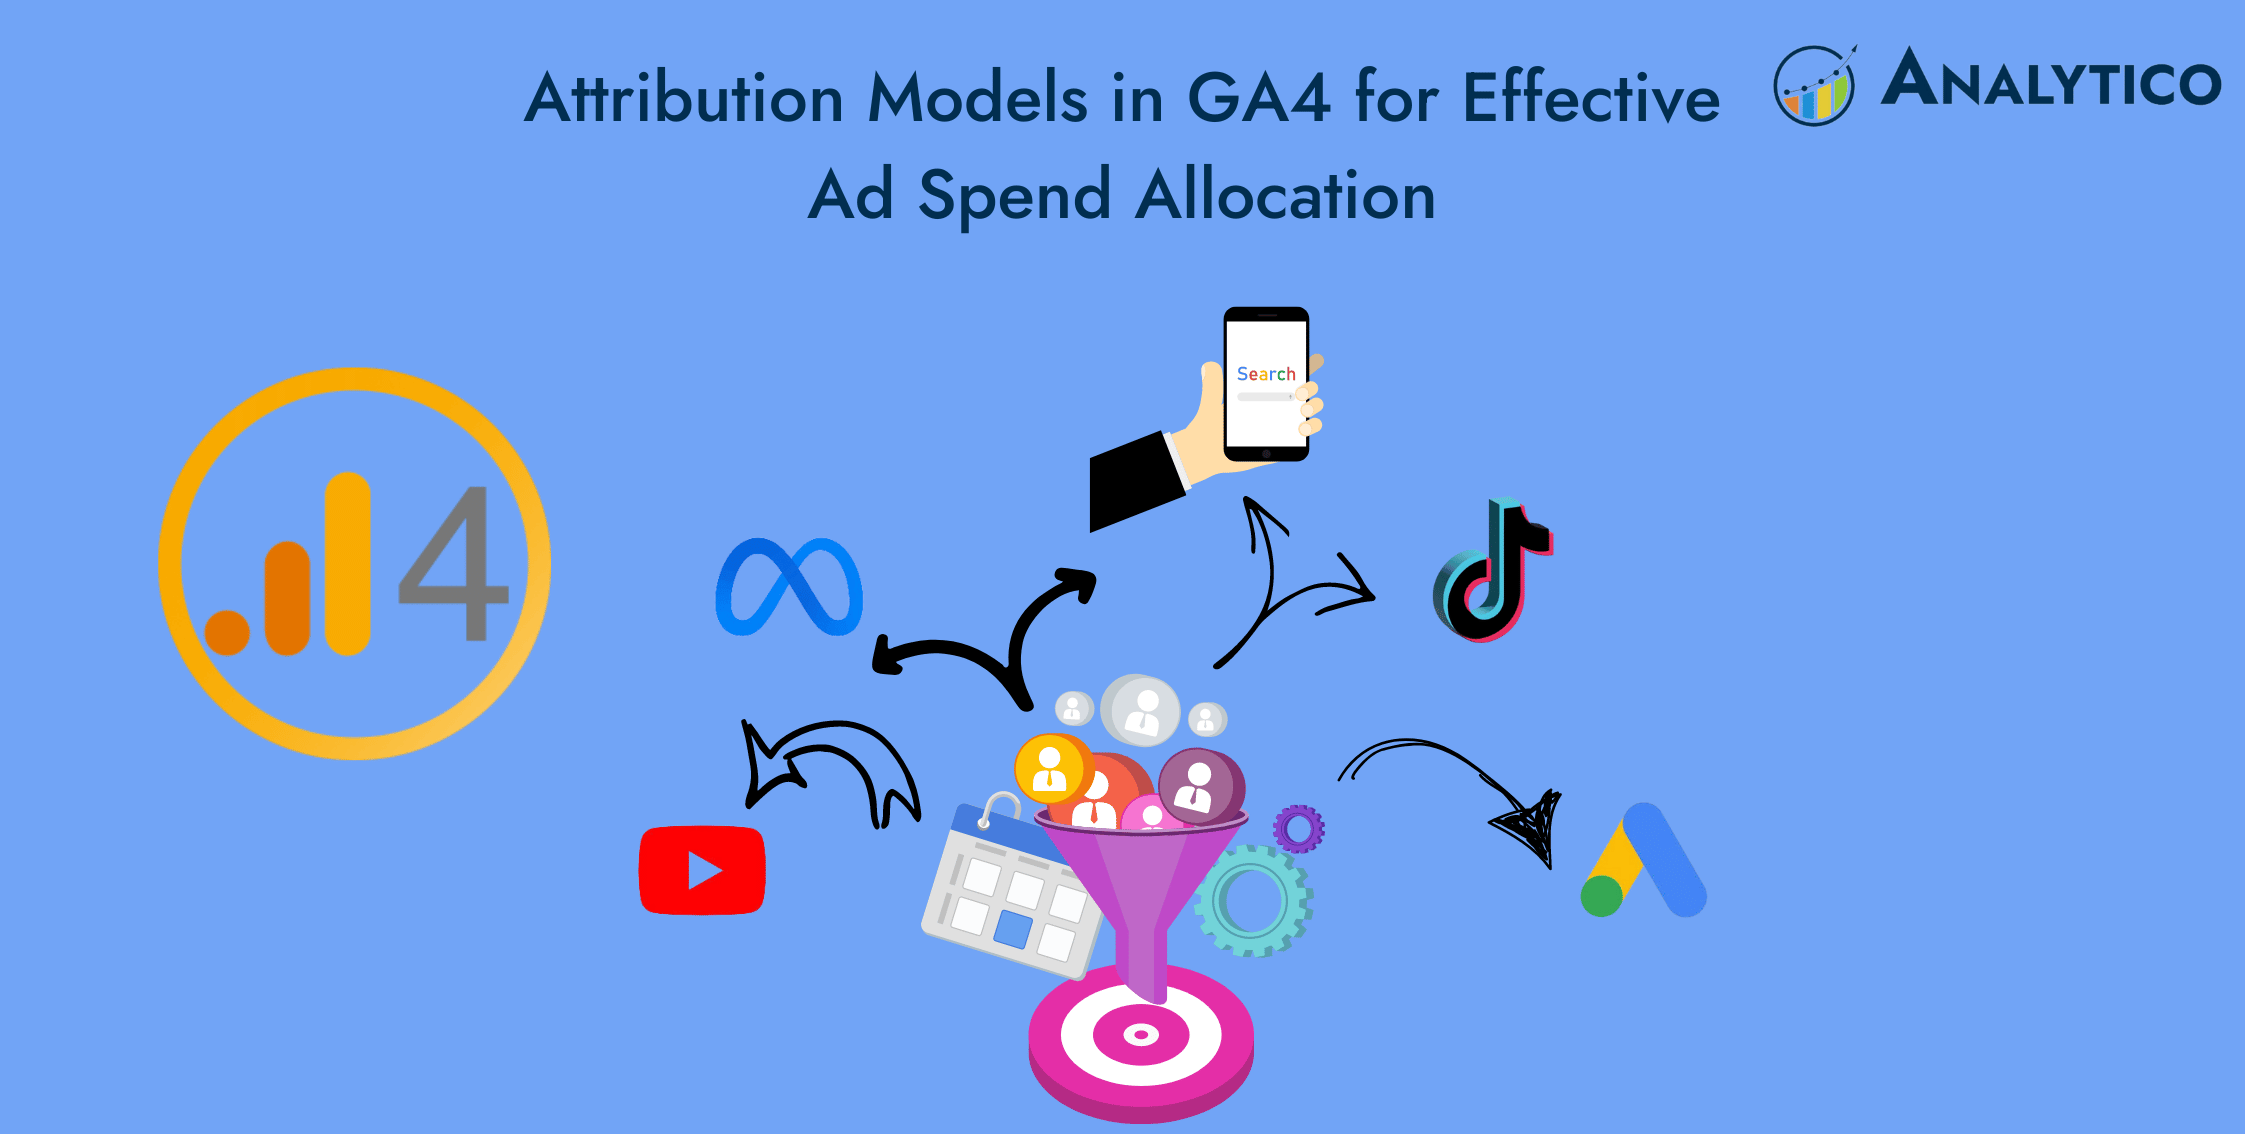 Attribution Models in GA4 for Effective Ad Spend Allocation